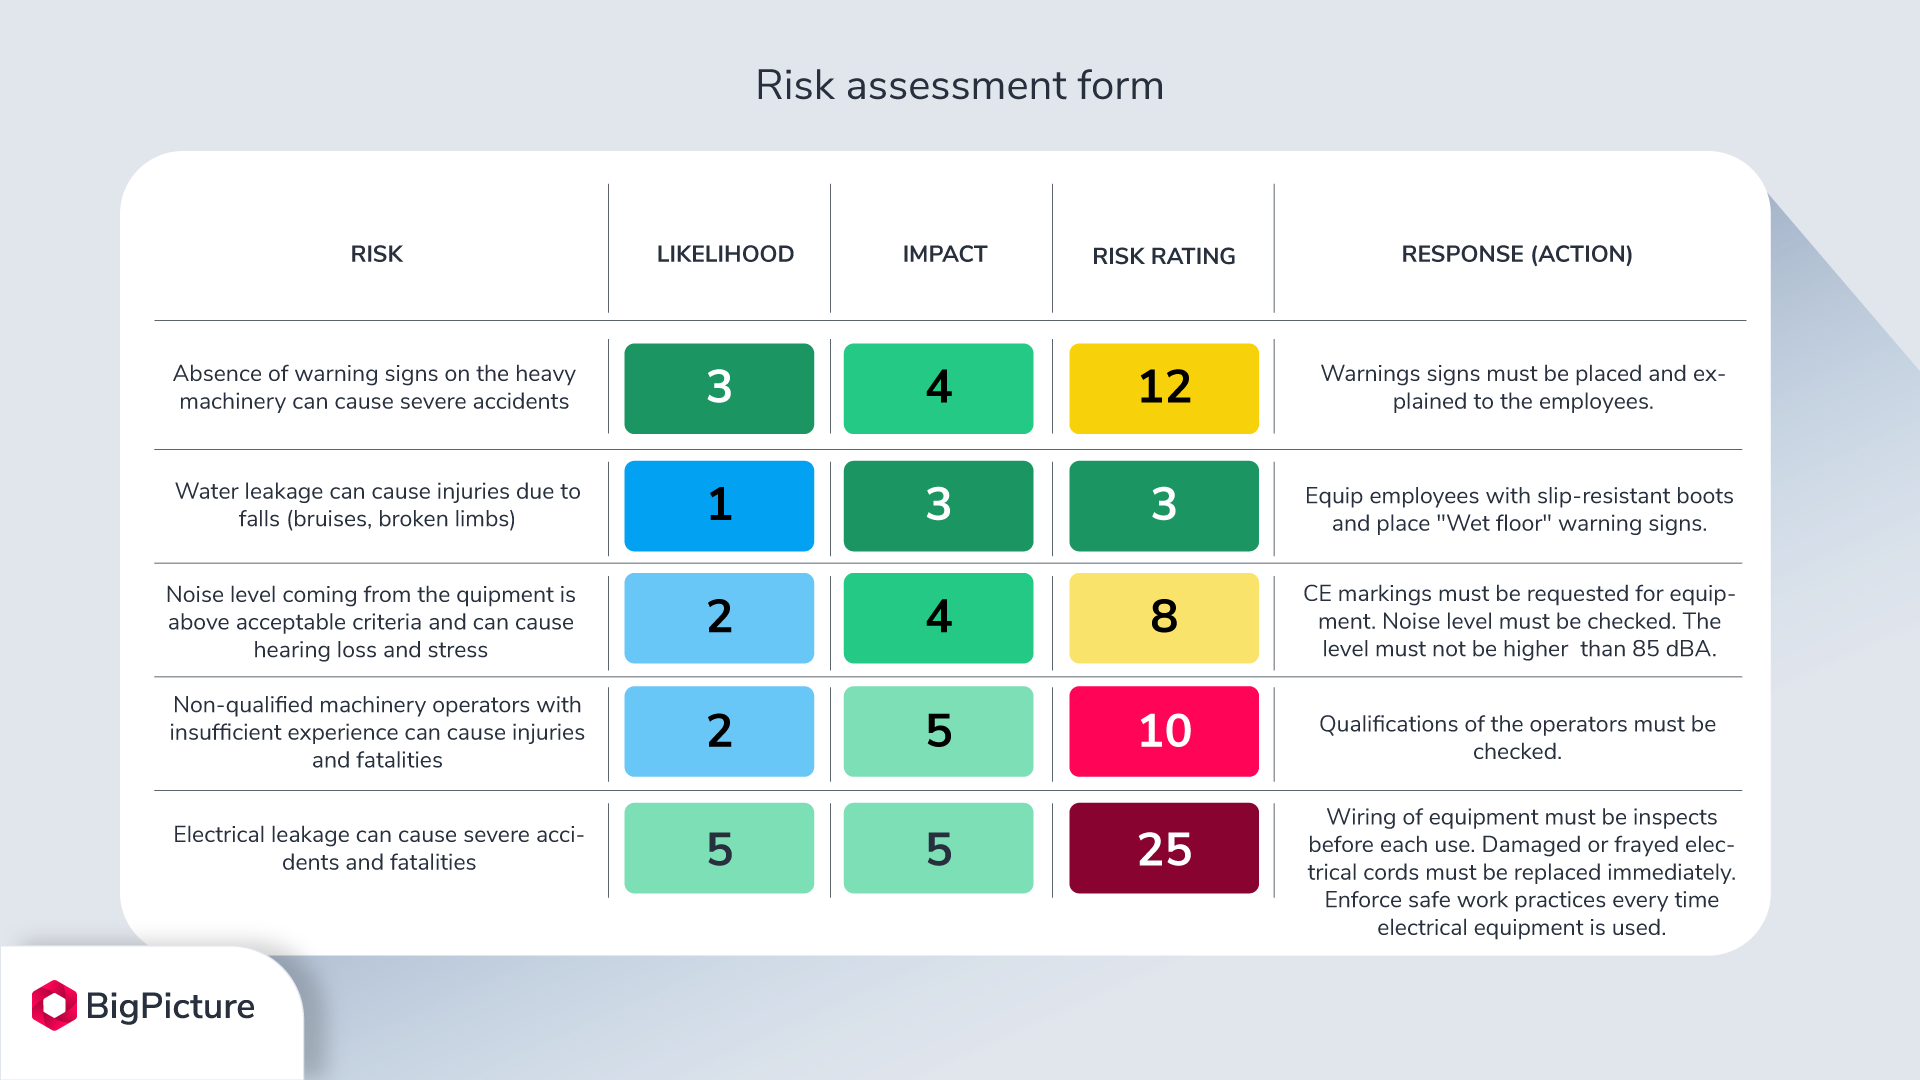 Rsik assessment form in color - the likelihood, impact, and risk rating columns are filled with numbers.